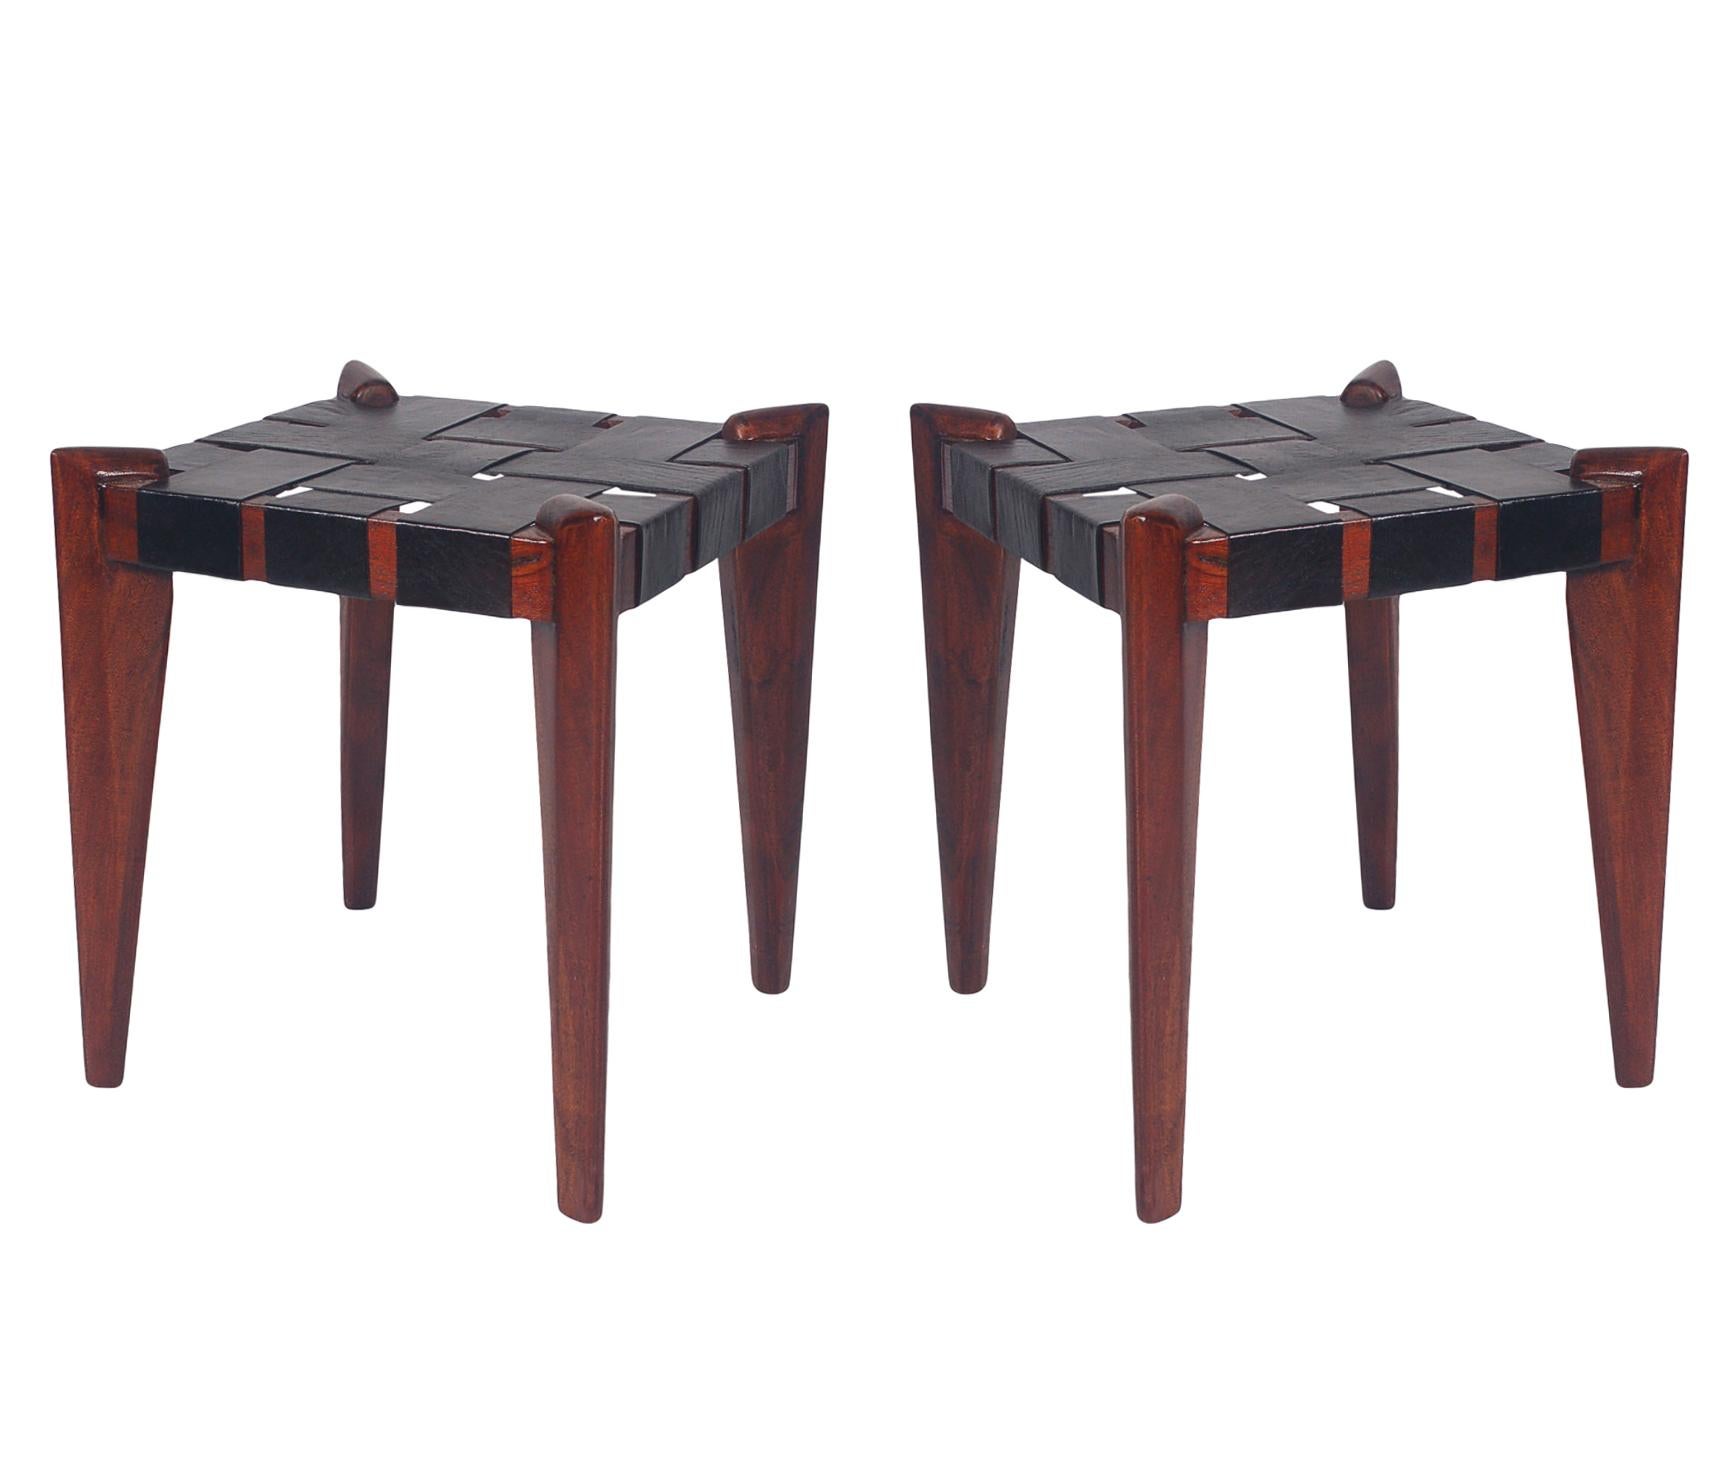 Late 20th Century Pair of Midcentury Danish Modern Wood and Woven Black Leather Stools or Benches